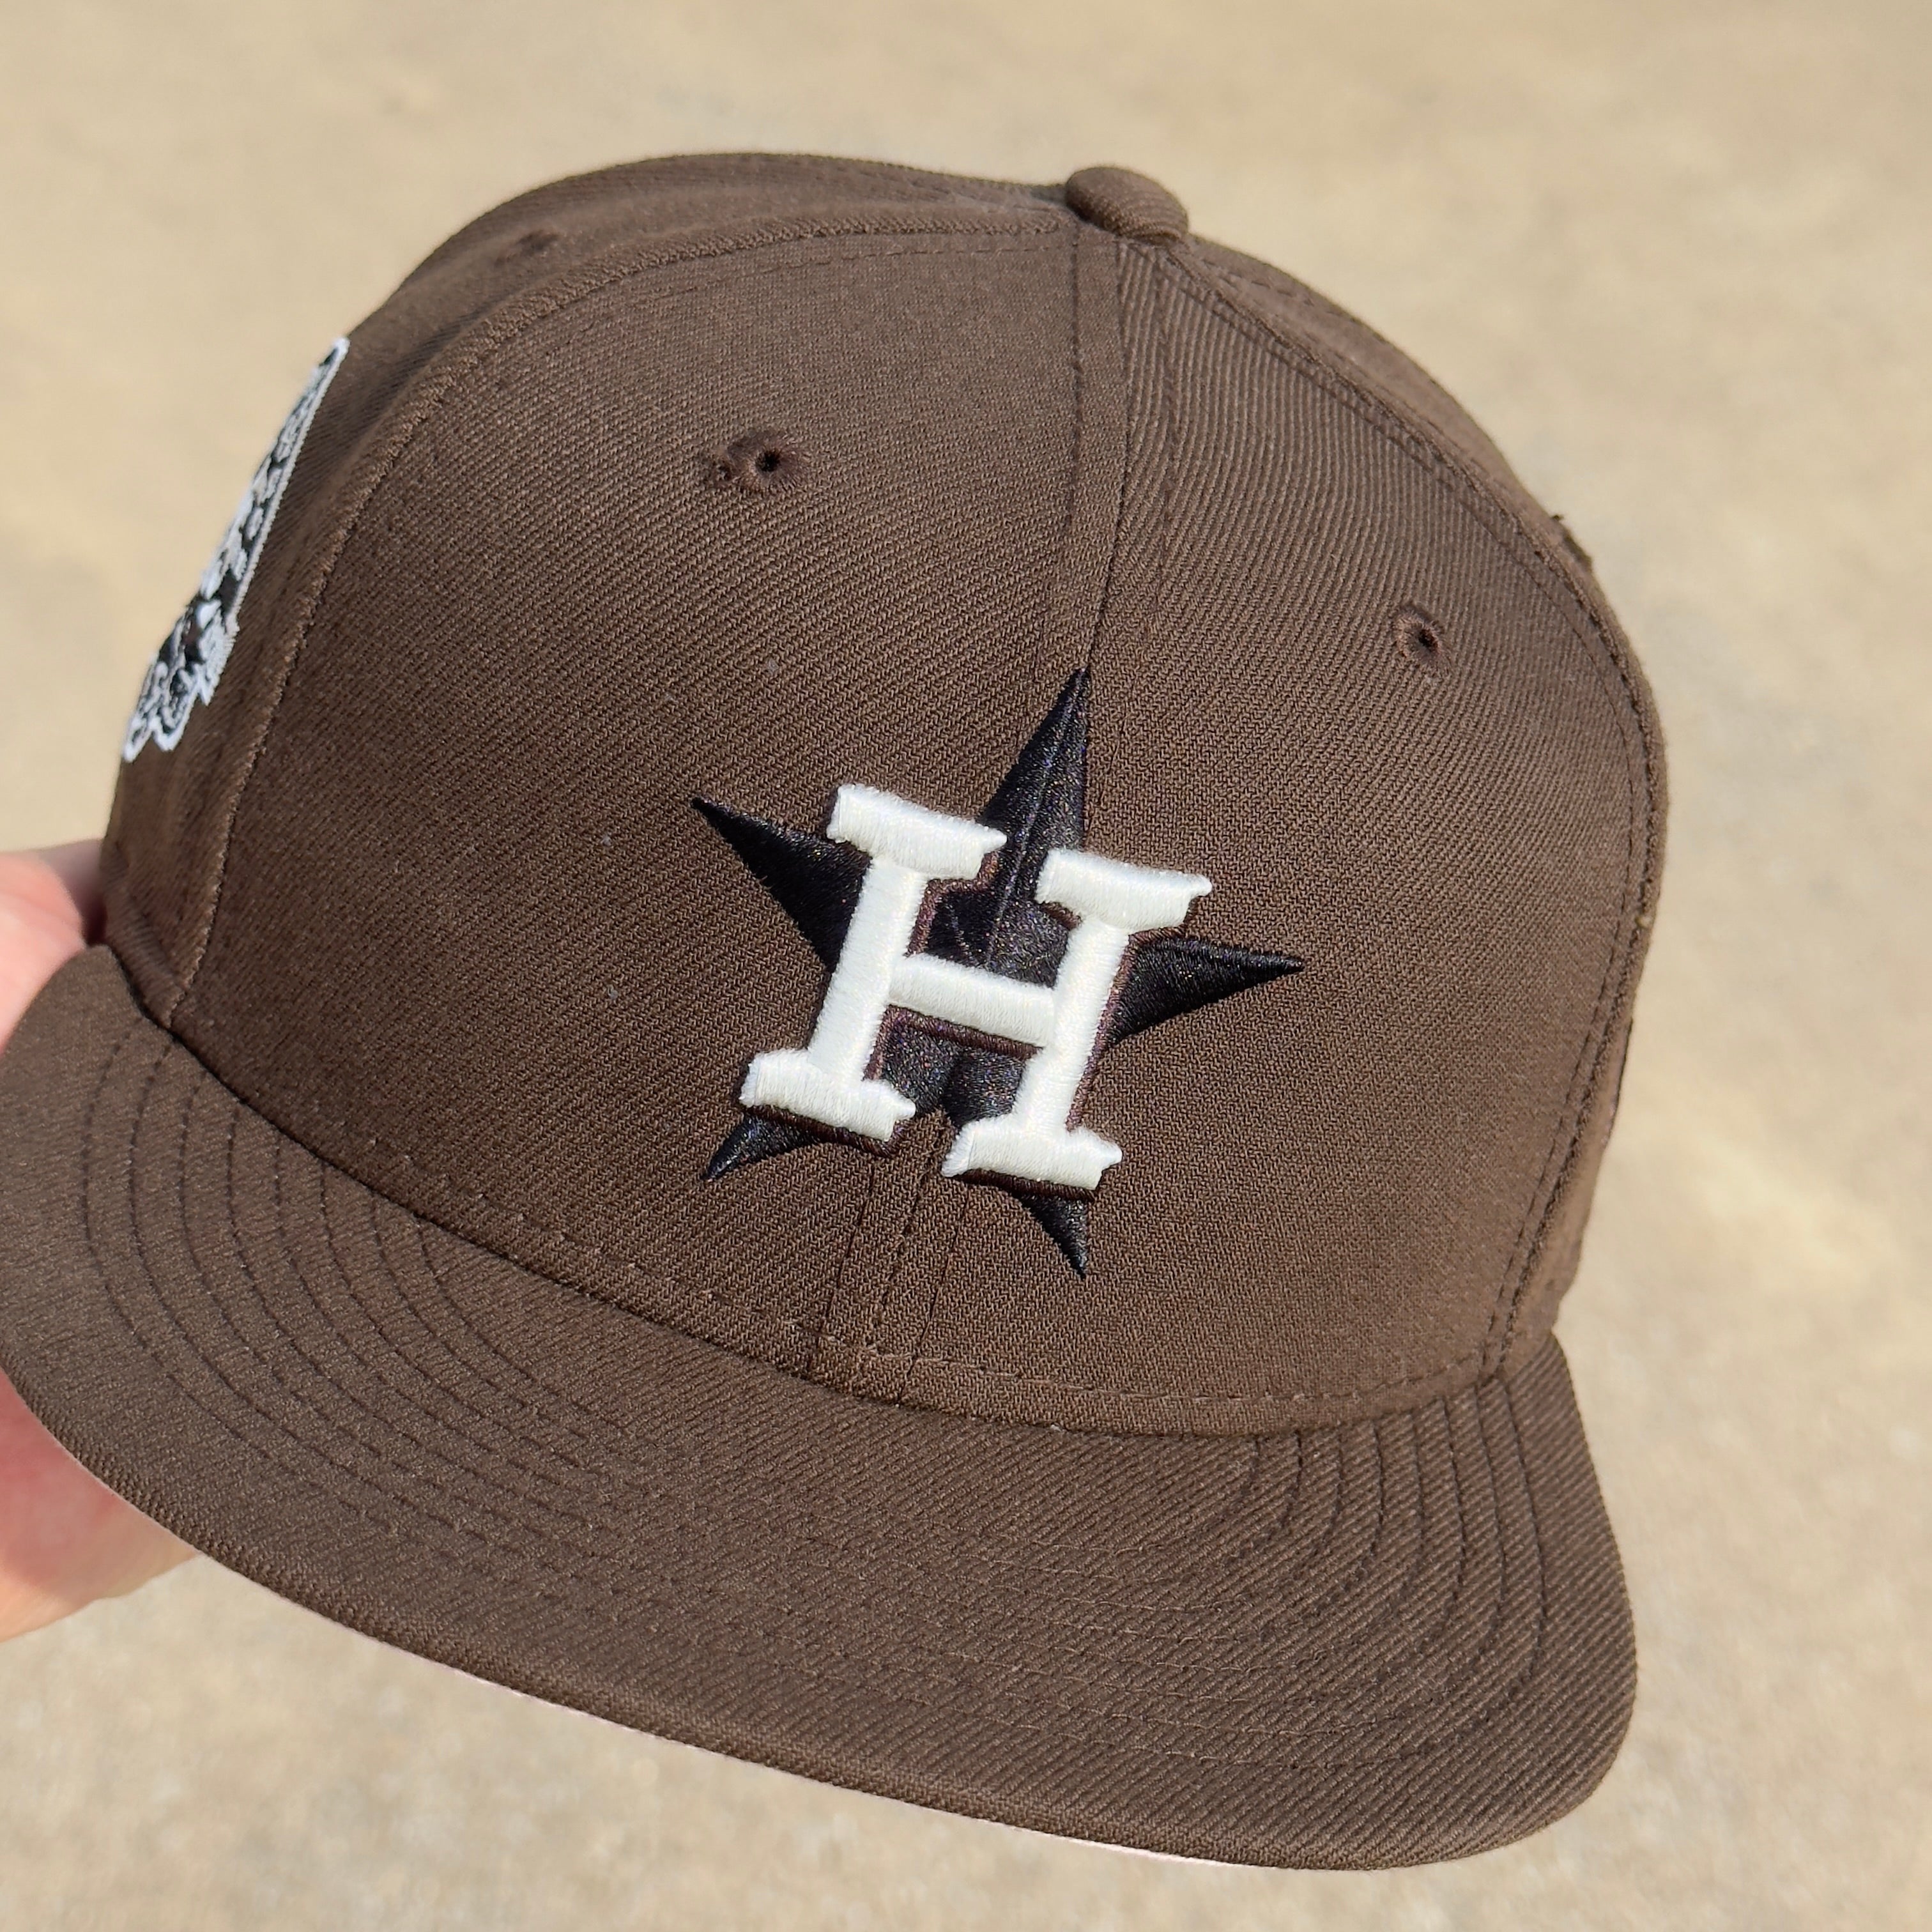 1/2 USED Brown Houston Astros 45th Anniversary 59fifty New Era Fitted Hat Cap